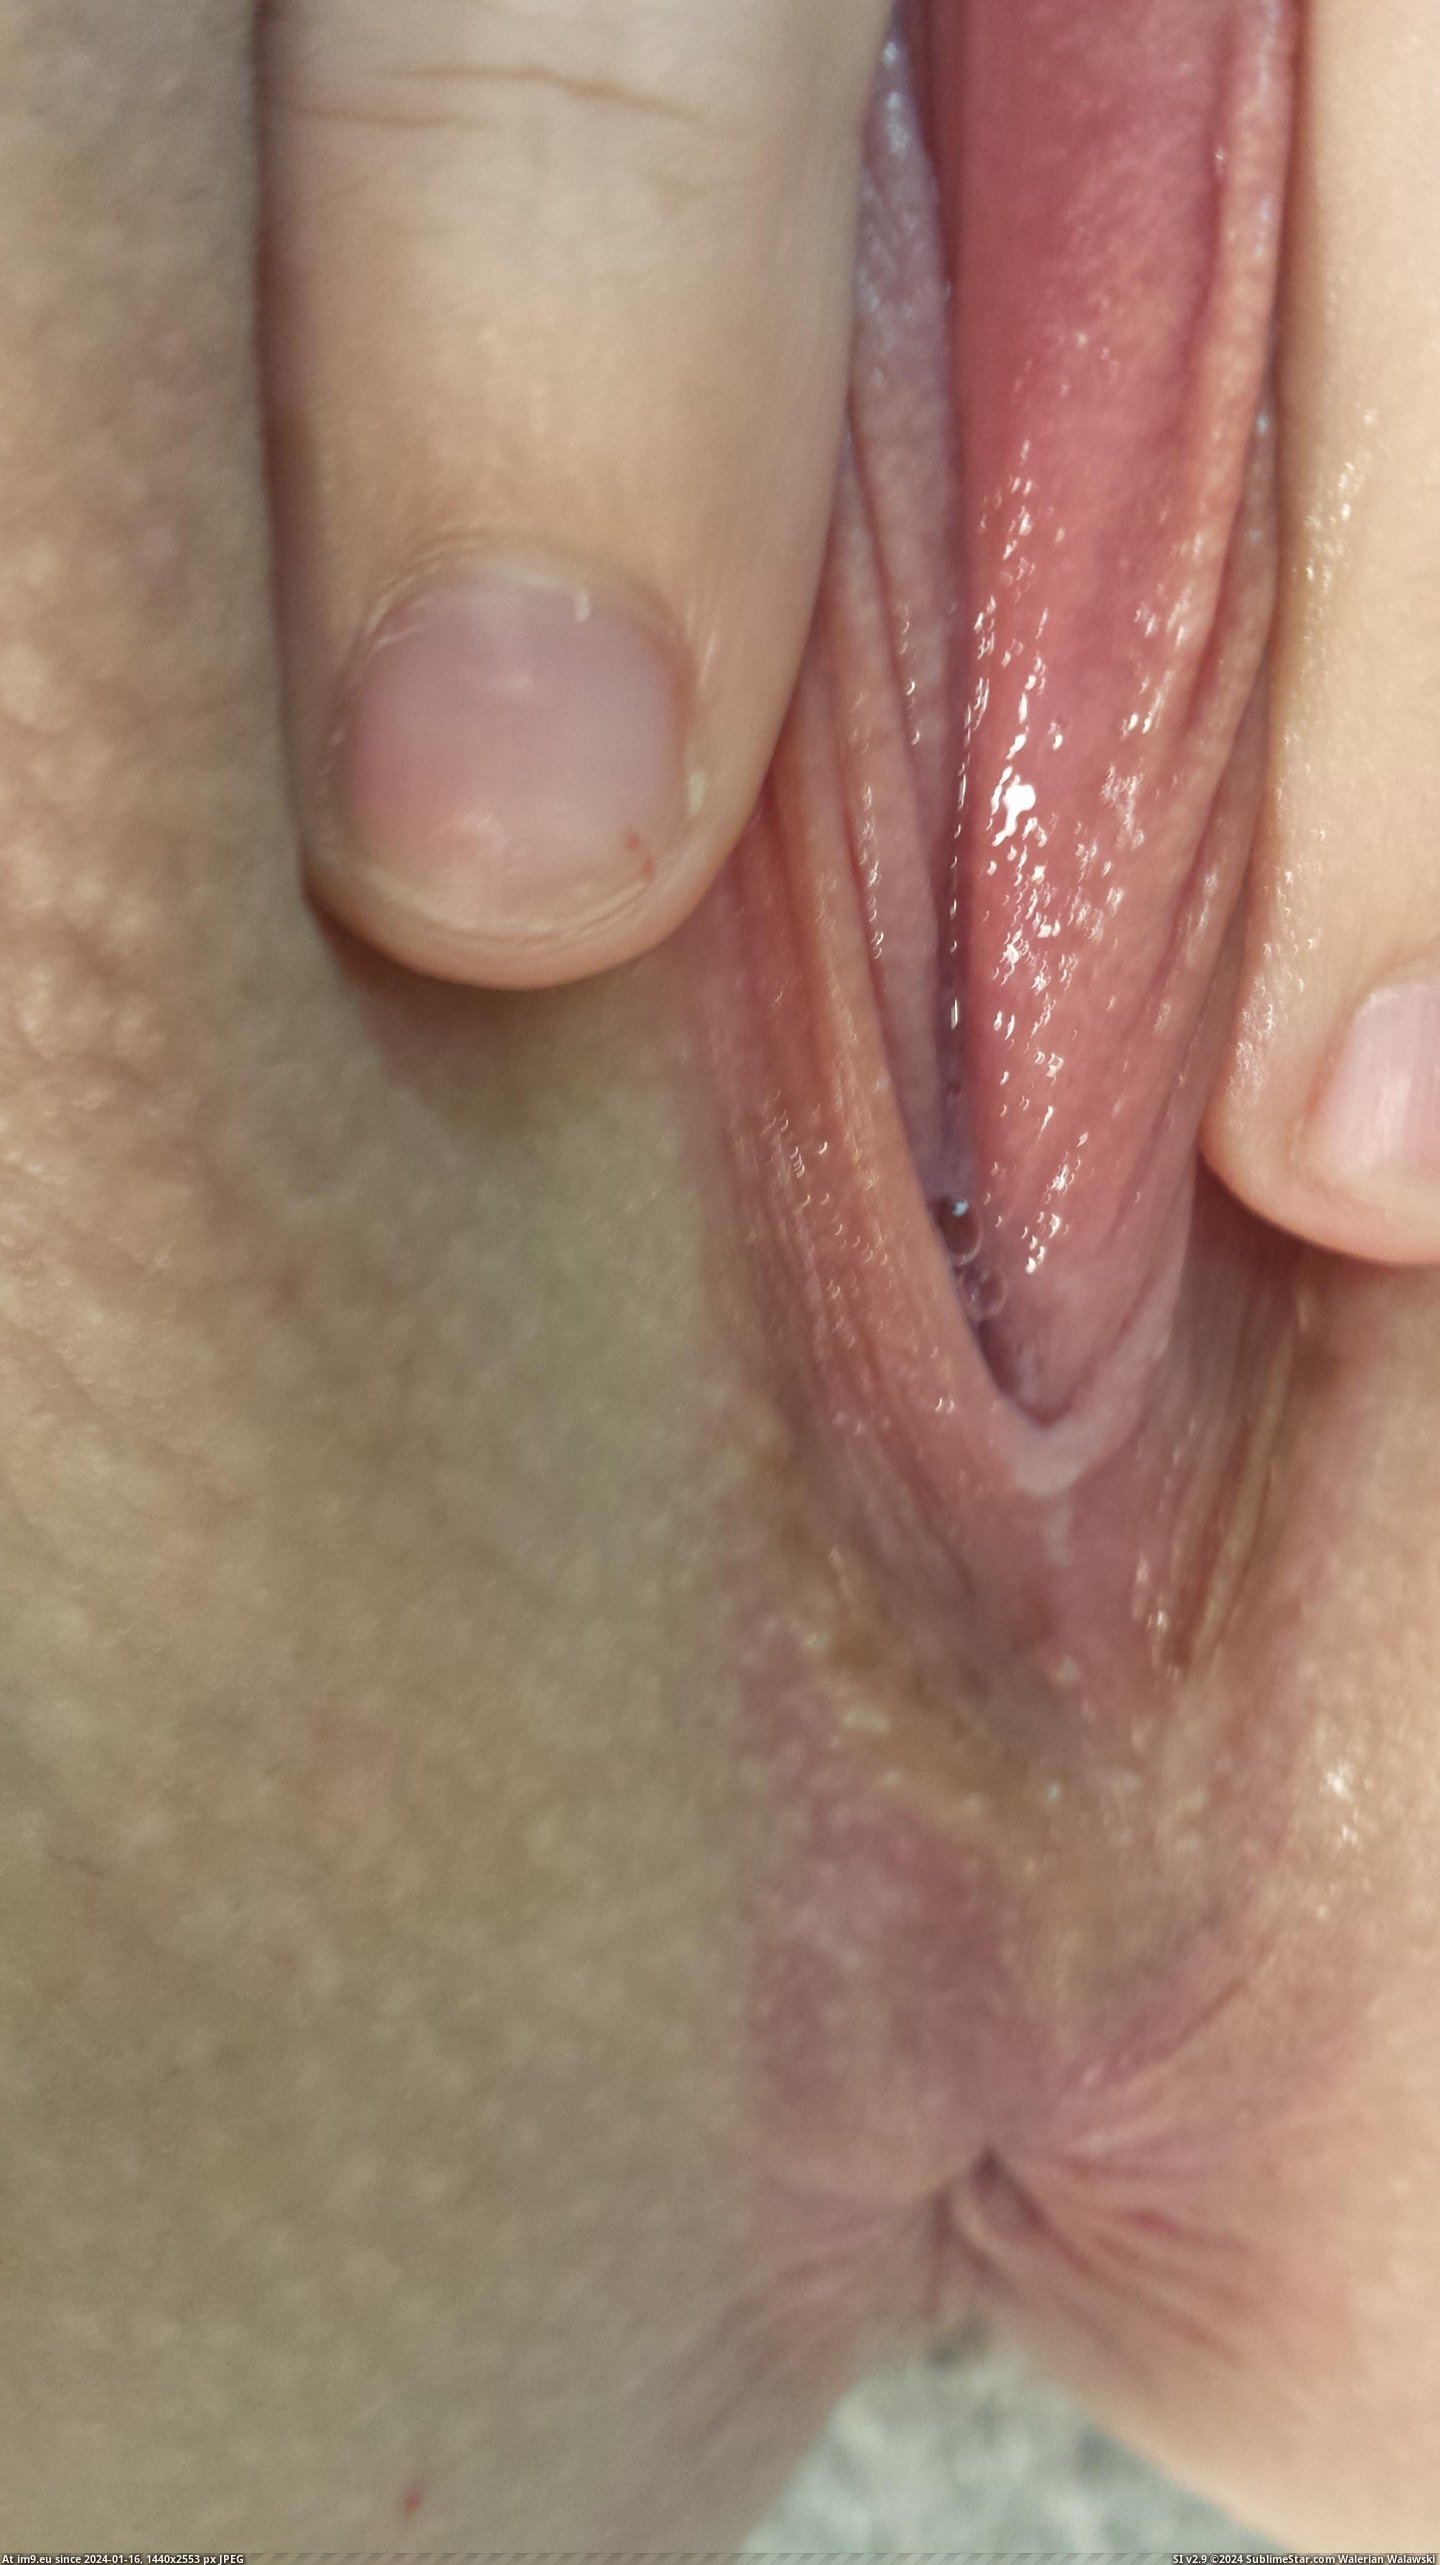 #Pussy #Pink #Pleasure #Viewing #Tight #Holes [Pussy] My tight pink holes (f)or your viewing pleasure... 25 Pic. (Image of album My r/PUSSY favs))